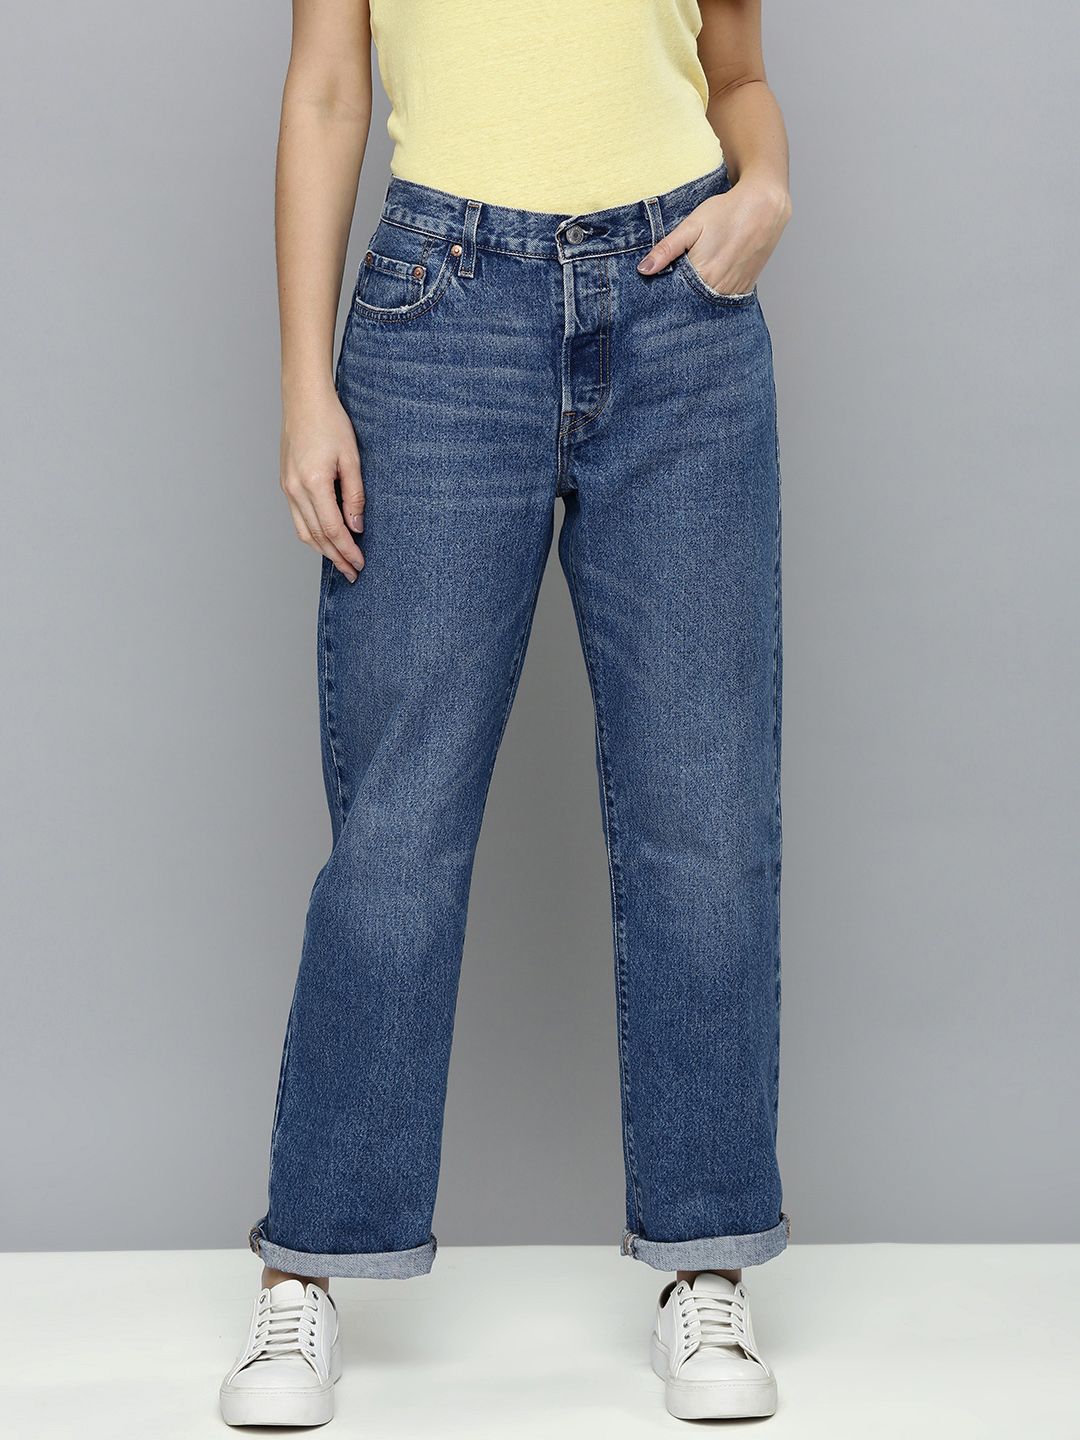 Levis Women Blue Straight Fit Light Fade Jeans Price in India